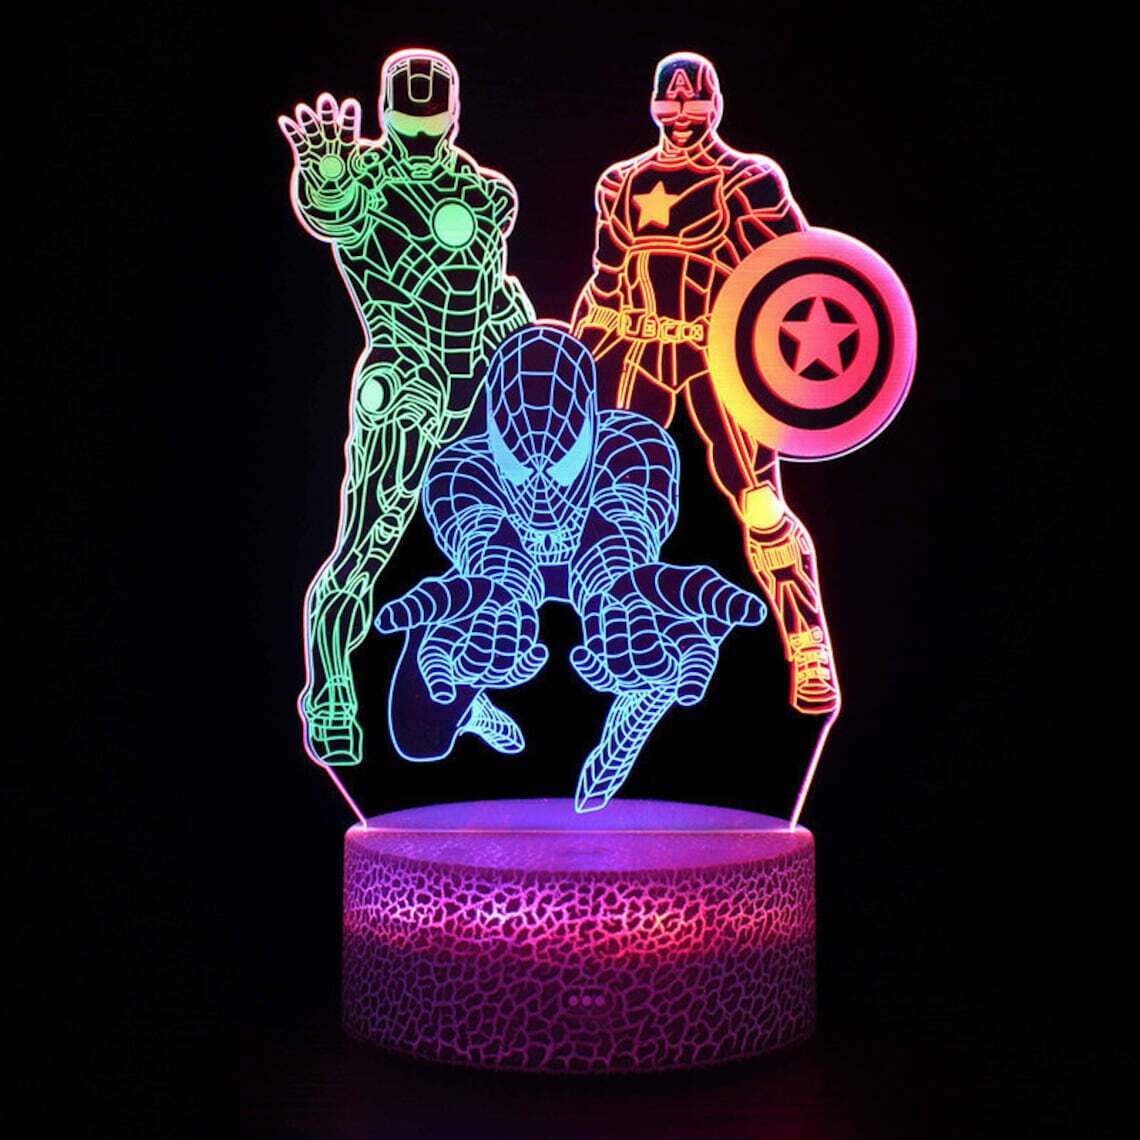 3D Spiderman and Friends Neon Lamp